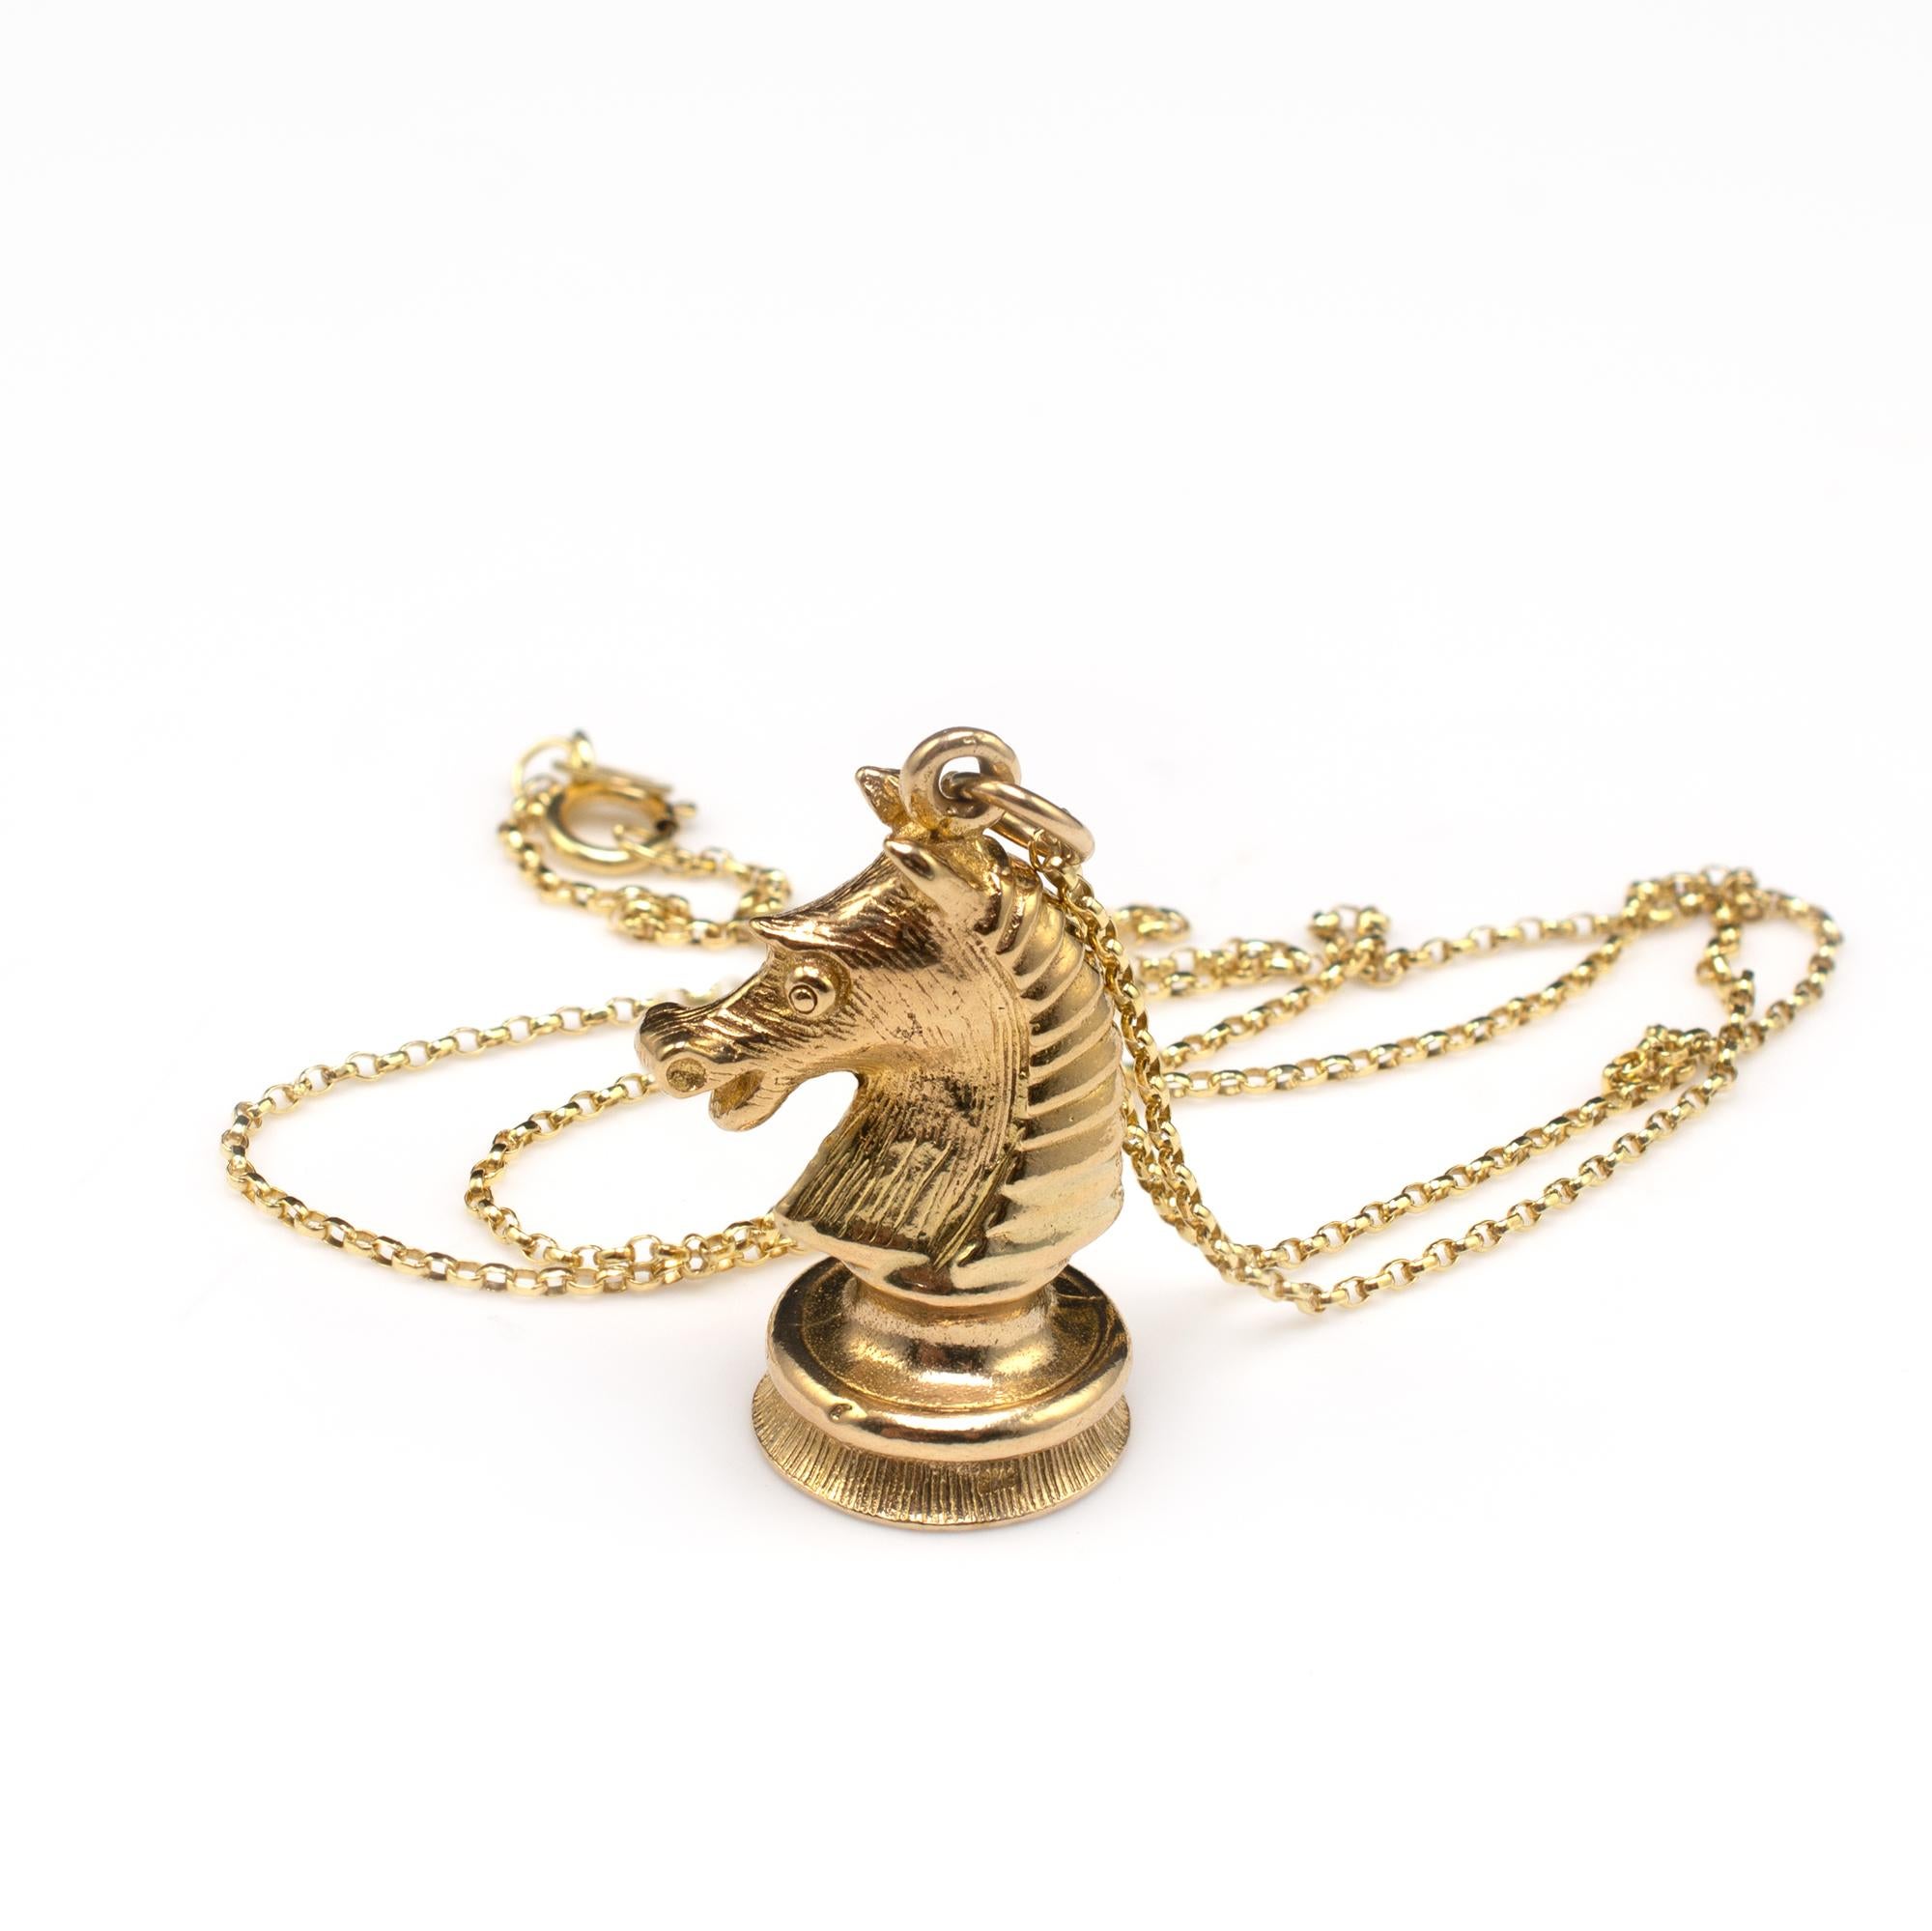 This gold Knight chess piece pendant displays full hallmarks for London 1971.

The gold horse, displays engraved detail to the front and a stylized mane with graduated overlapping bands of gold. Holding ring attached with bale ring and complimentary